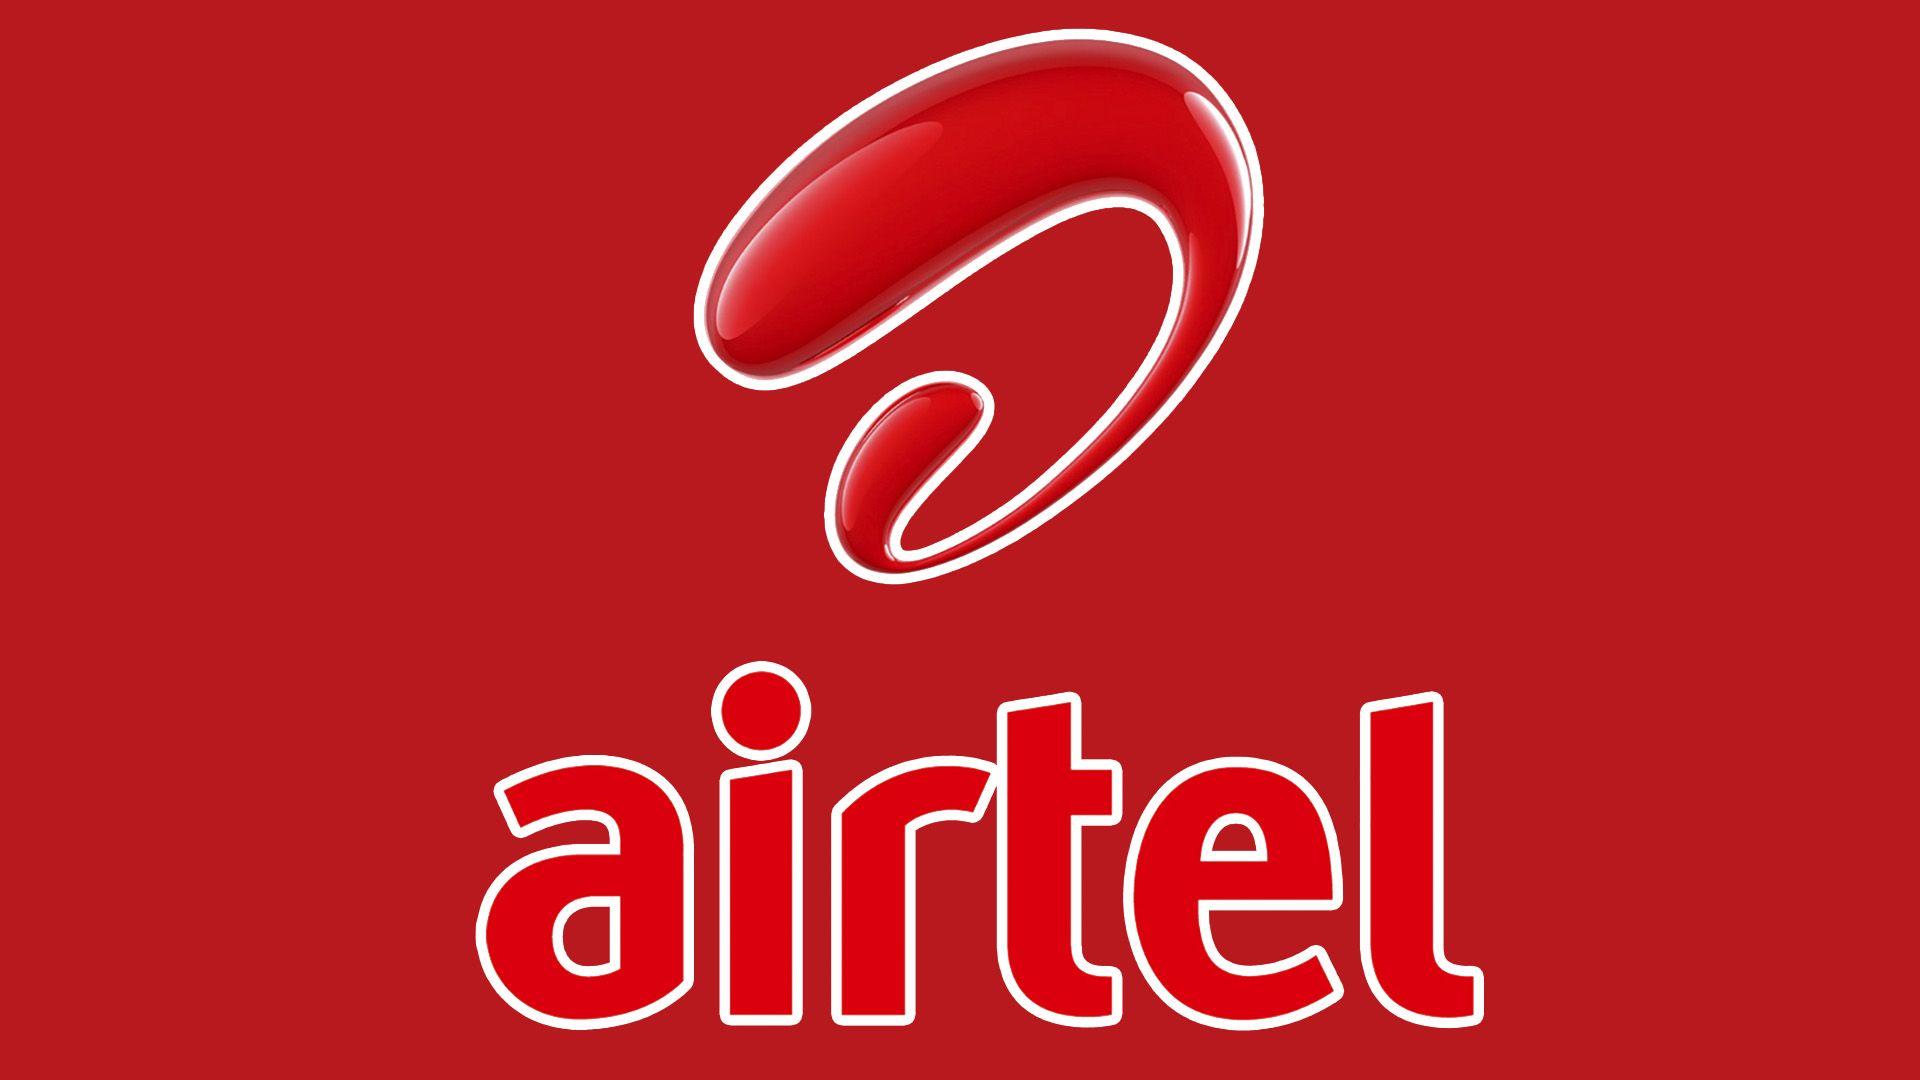 Artil Logo - Meaning Airtel logo and symbol | history and evolution